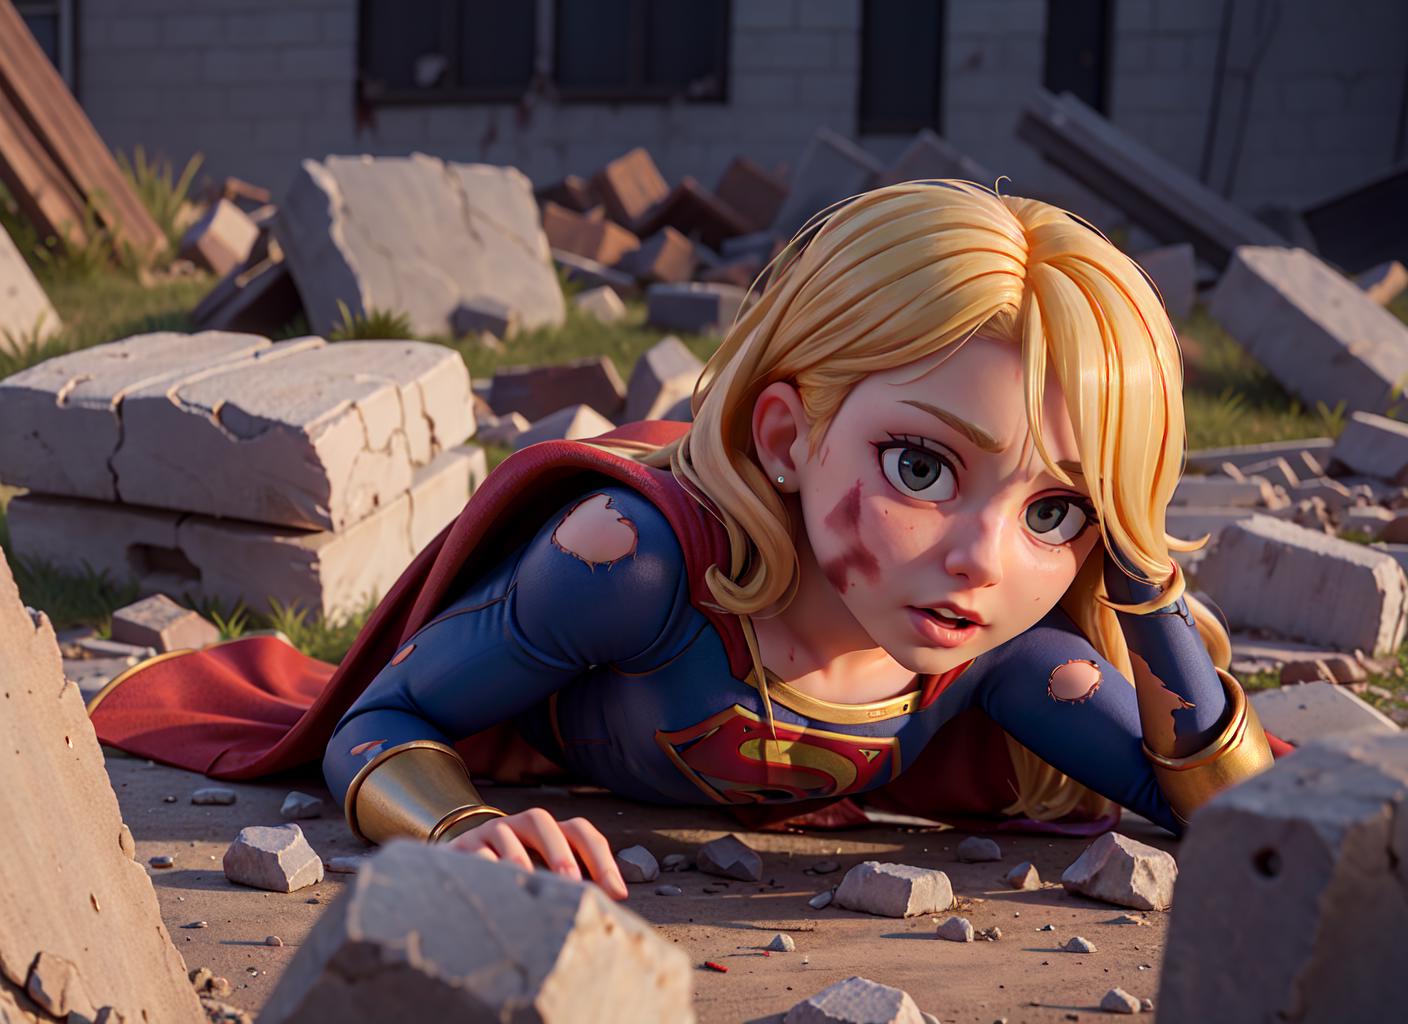 A CGI Supergirl Lying on Rocks with Cracked Skin